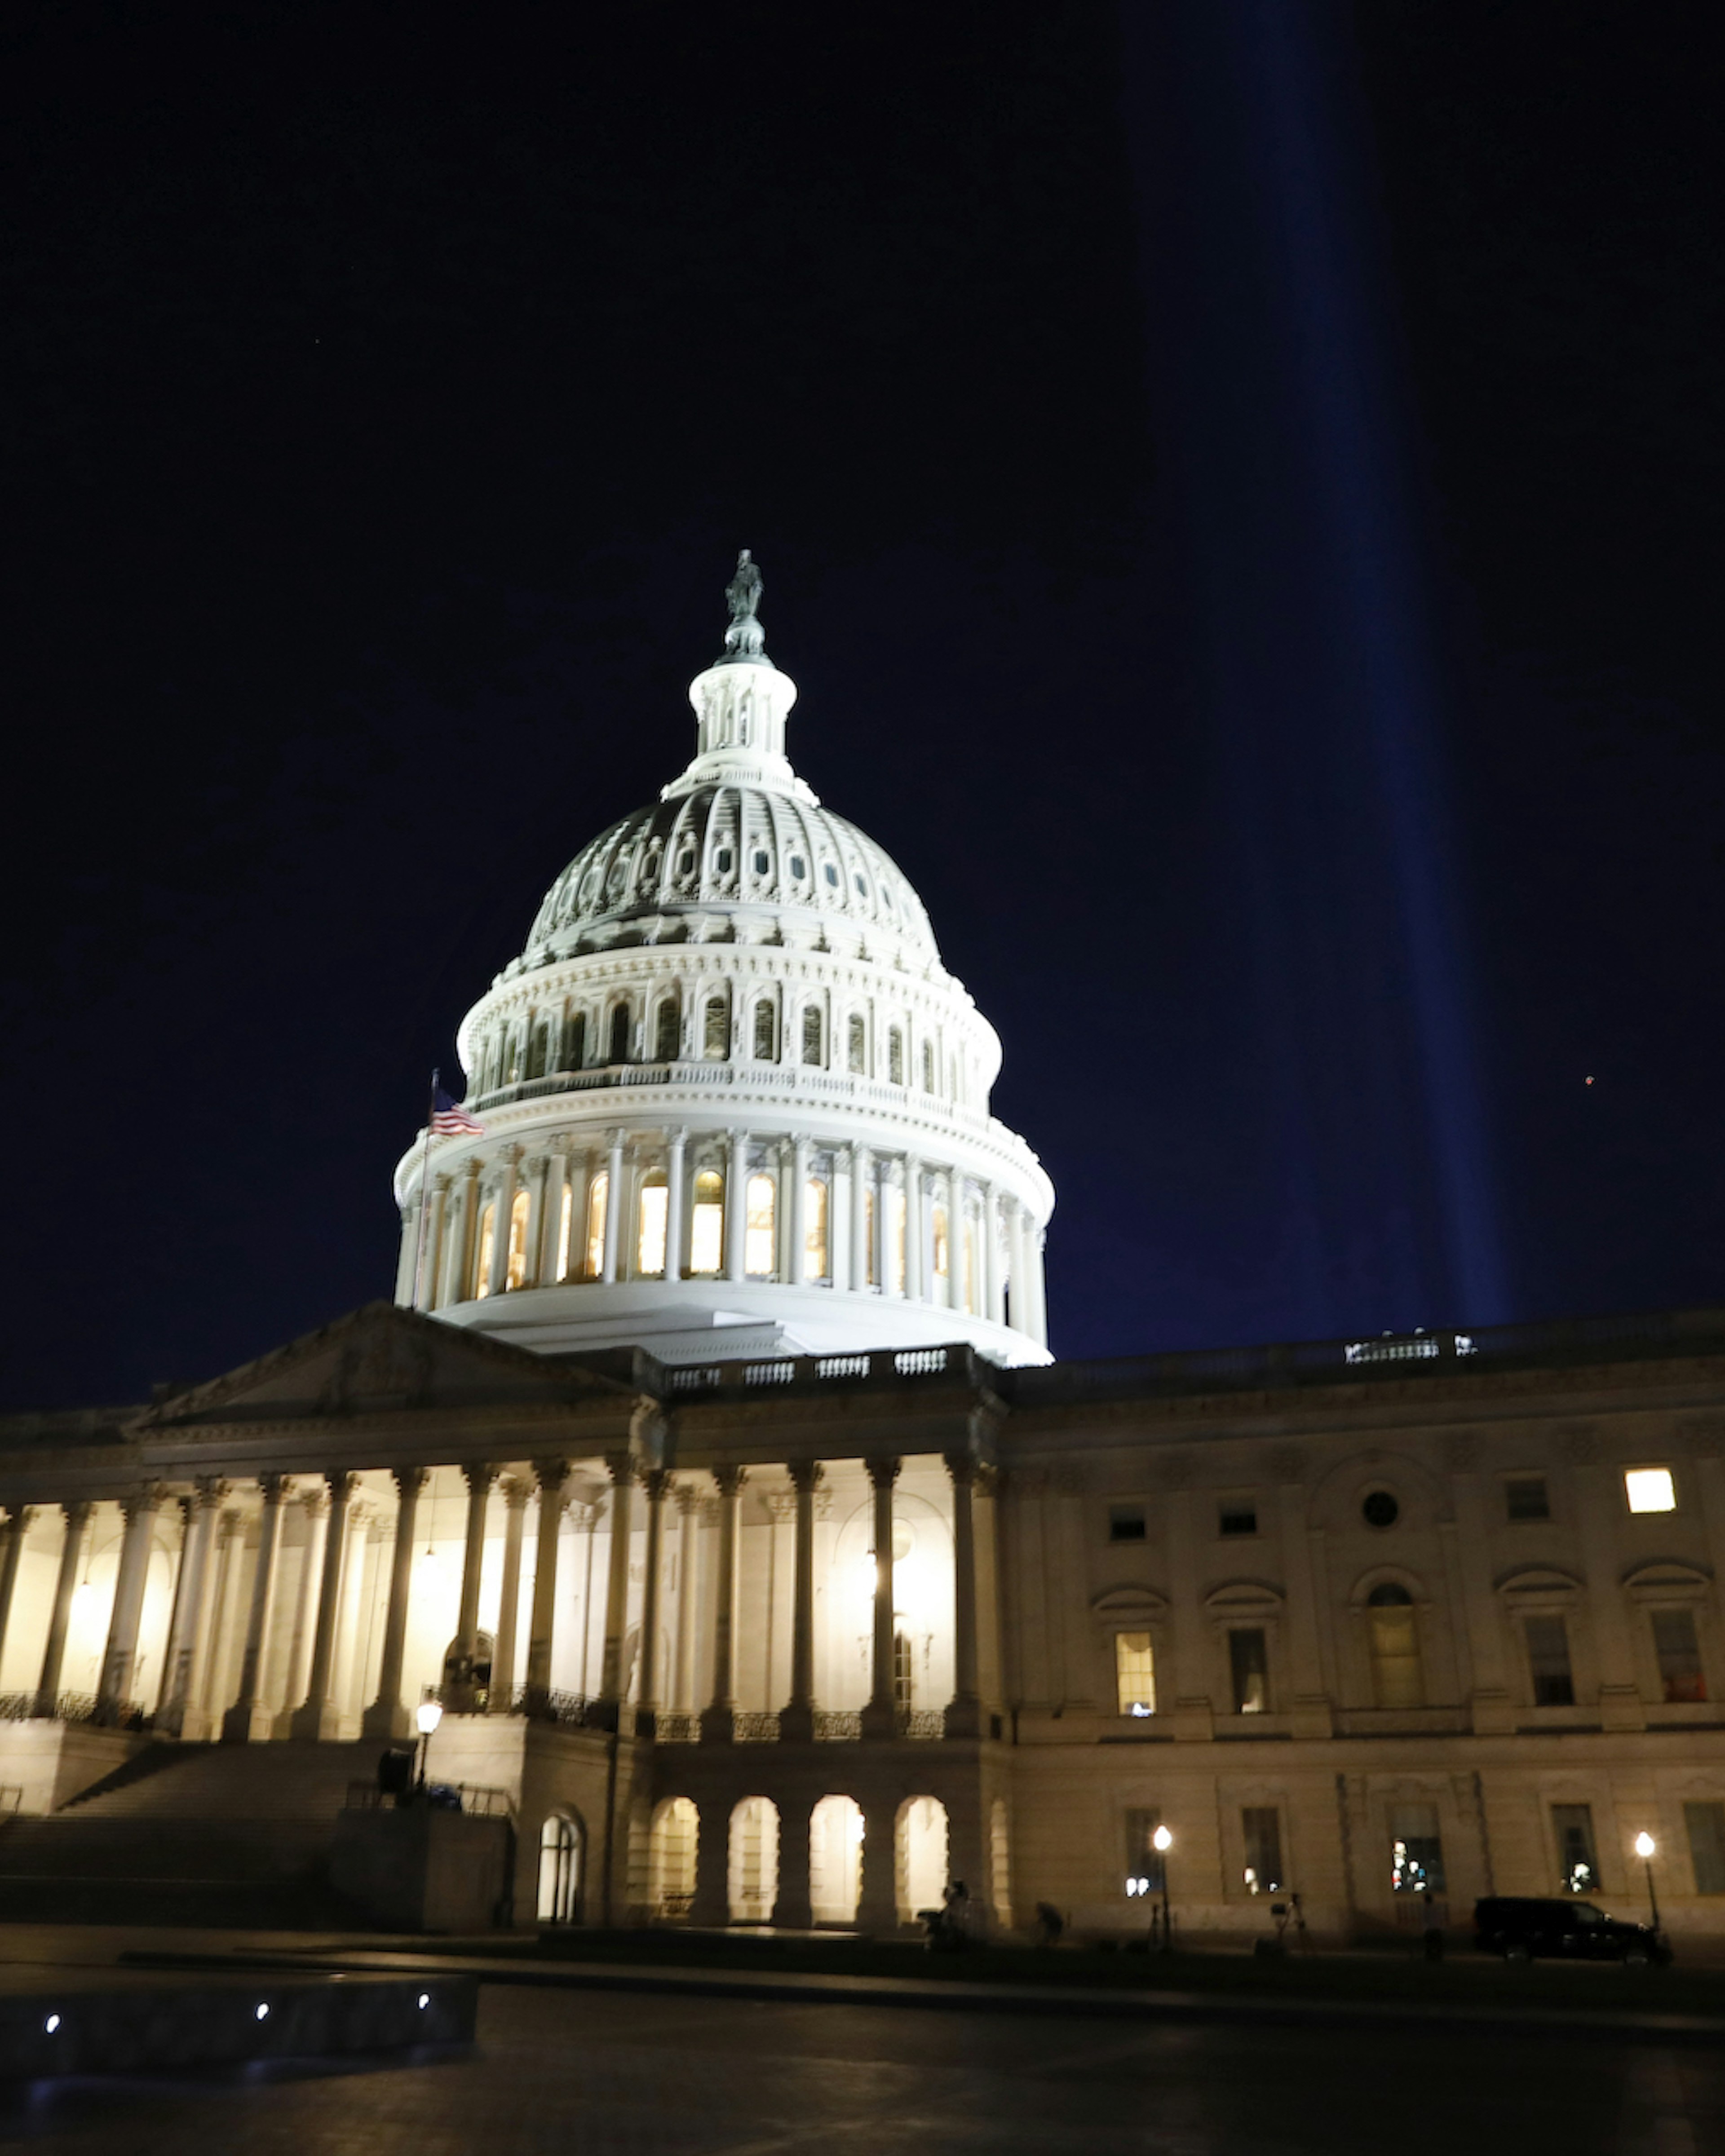 On the day night before the inauguration of President Elect Joe Biden the U.S. Capitol is lite up for the occasion. (Carolyn Cole / Los Angeles Times)